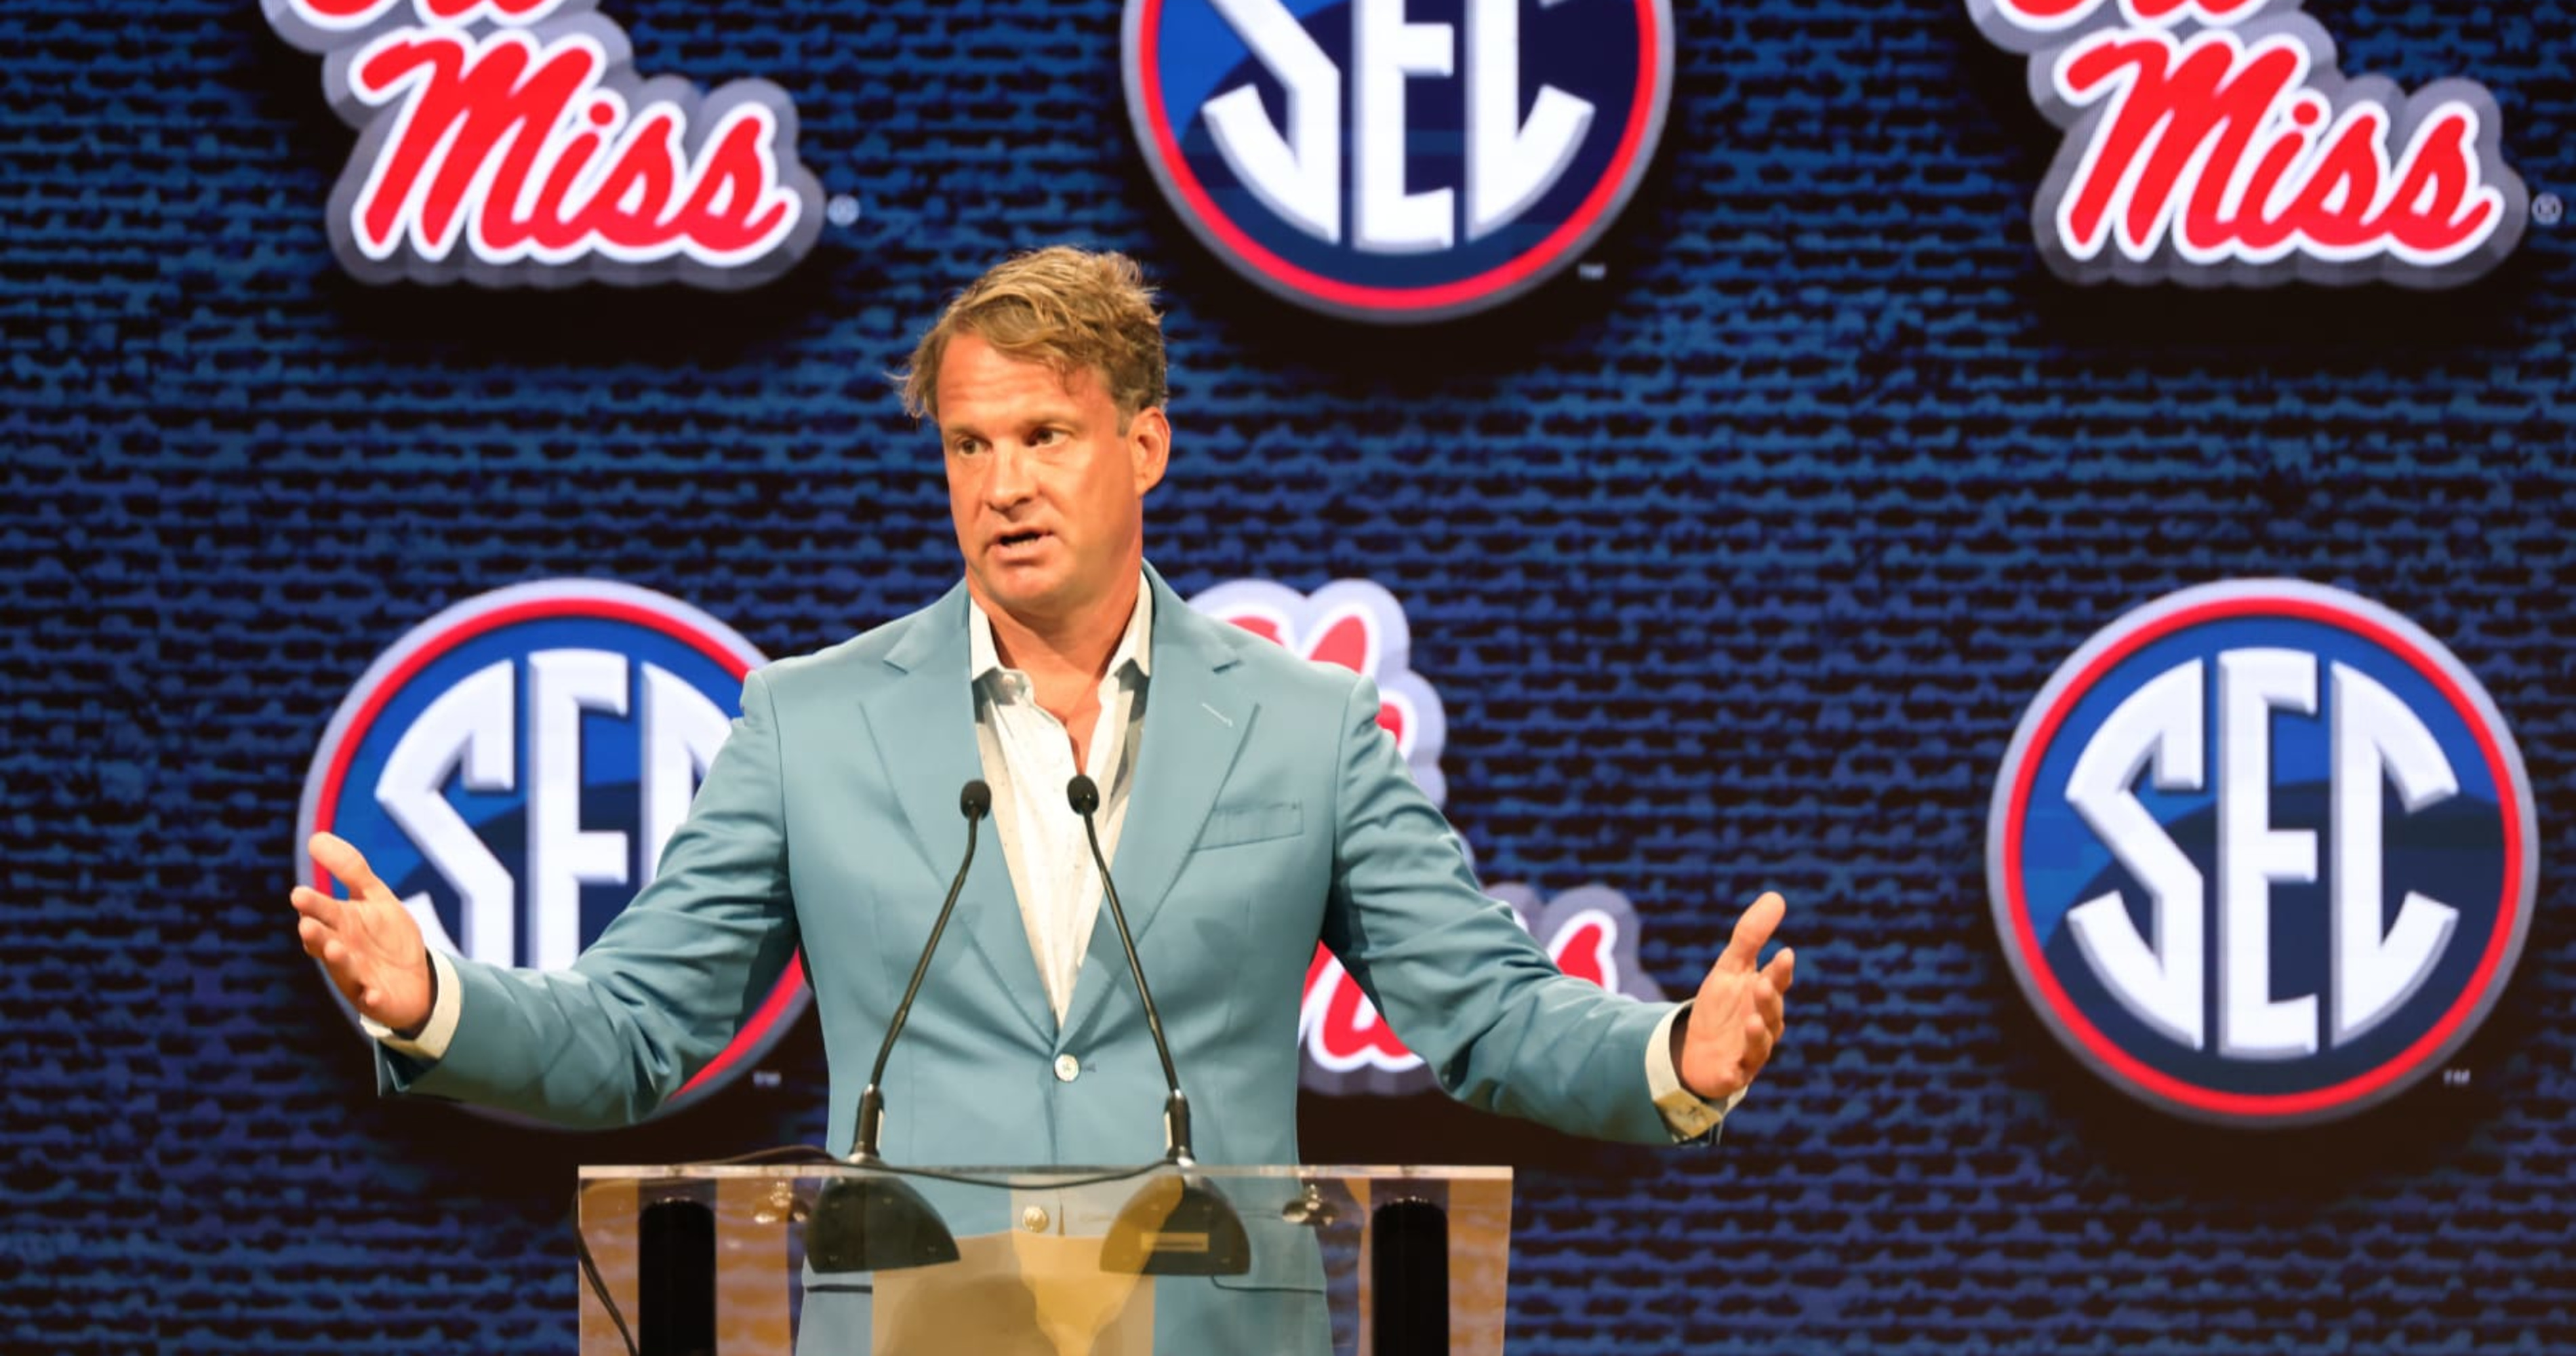 Ole Miss Lane Kiffin Sec A Super Conference Compares To Nfl With